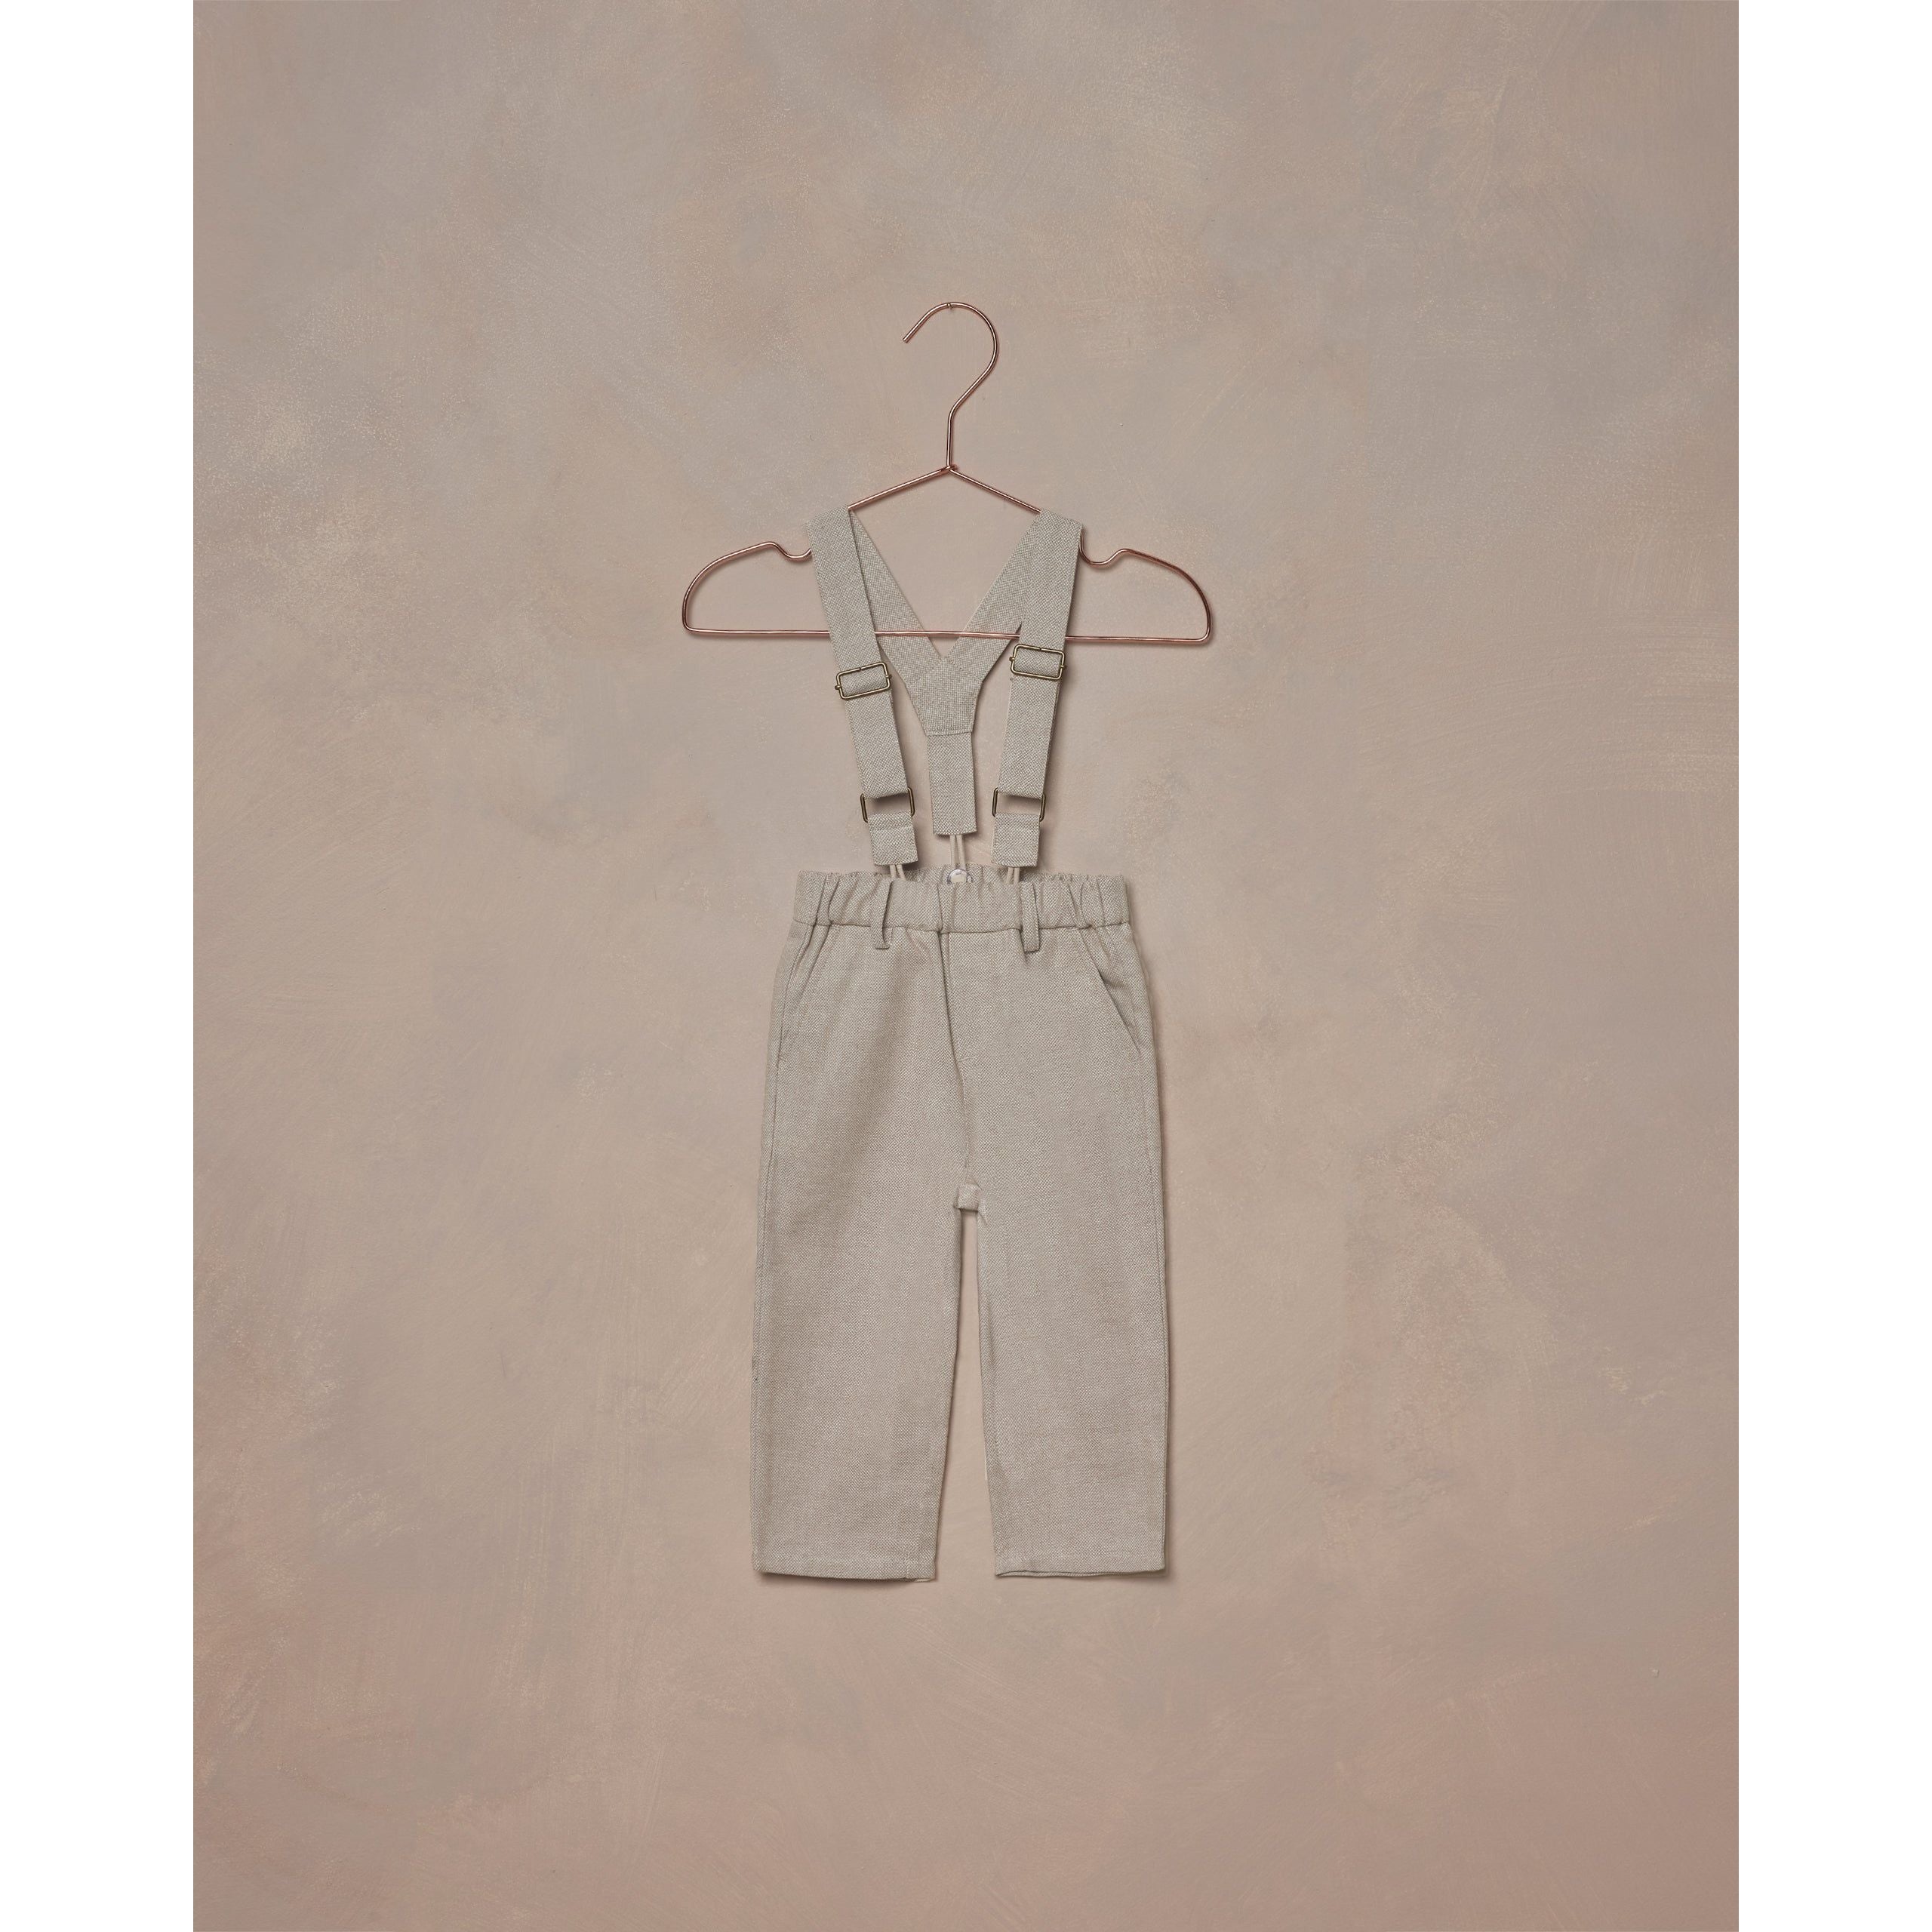 fog grey colored linen pants with suspenders